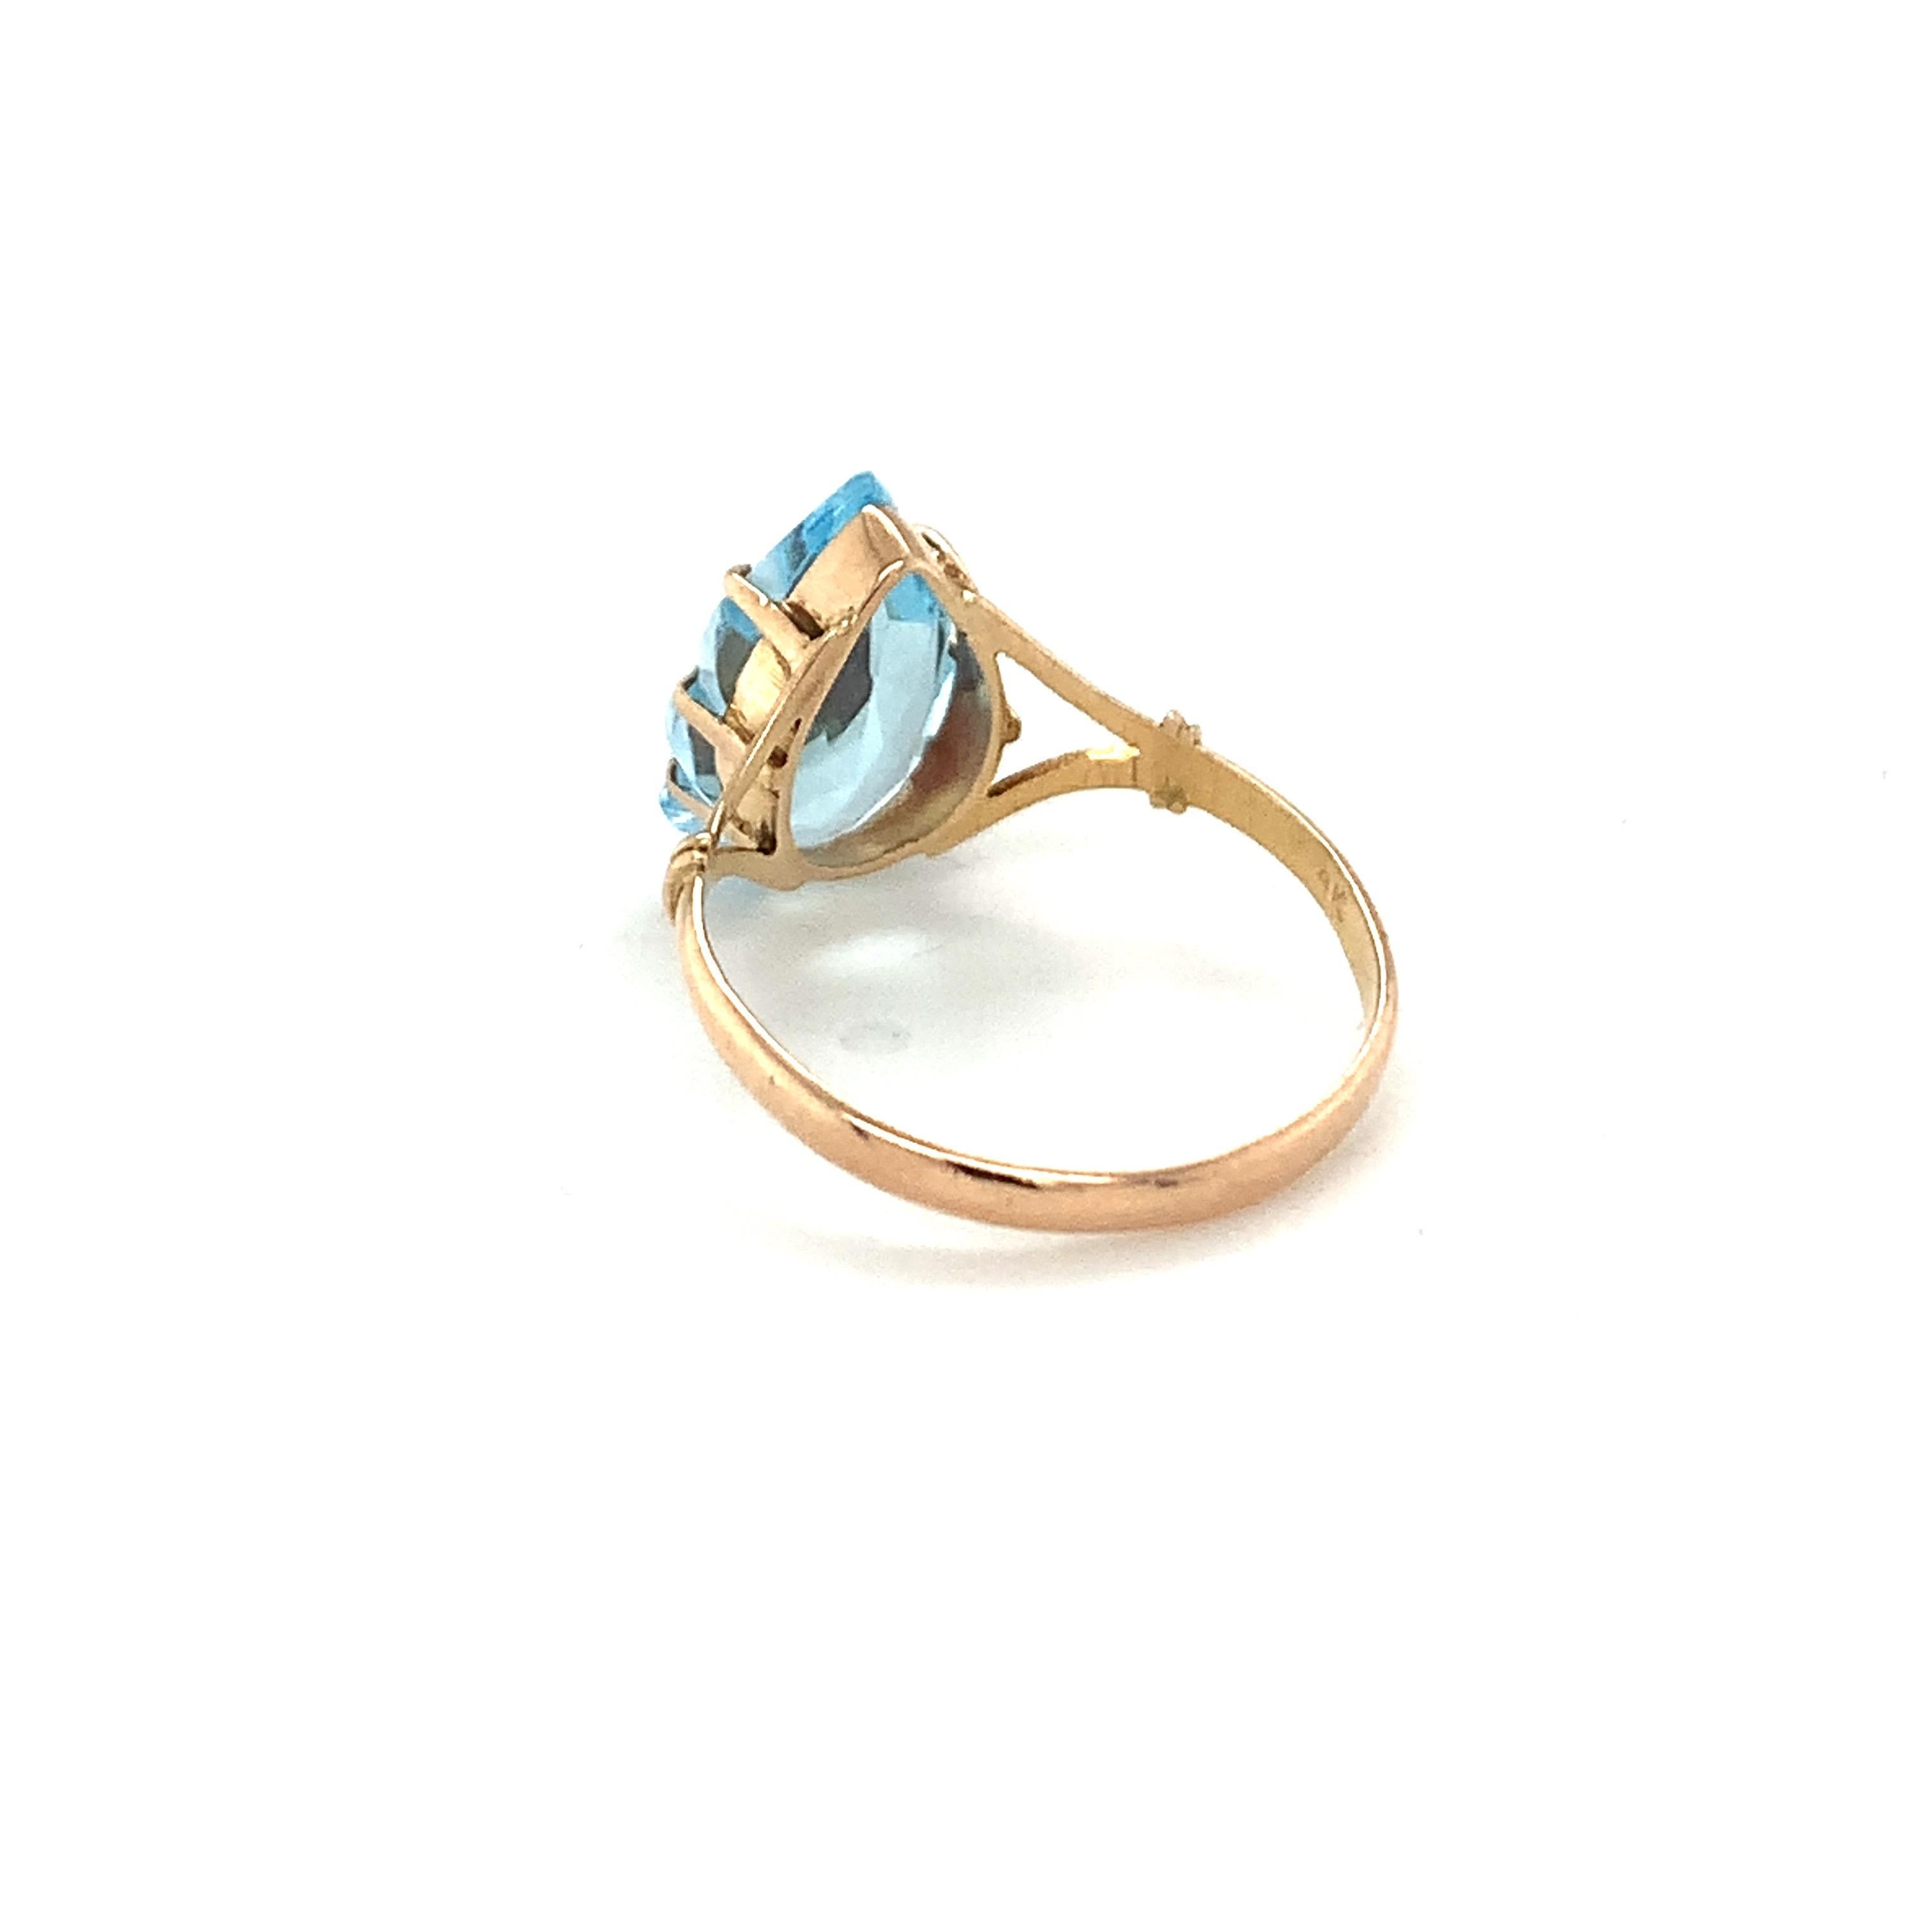 Tear Drop Blue Topaz Ring Set in 14k Yellow Gold For Sale 5